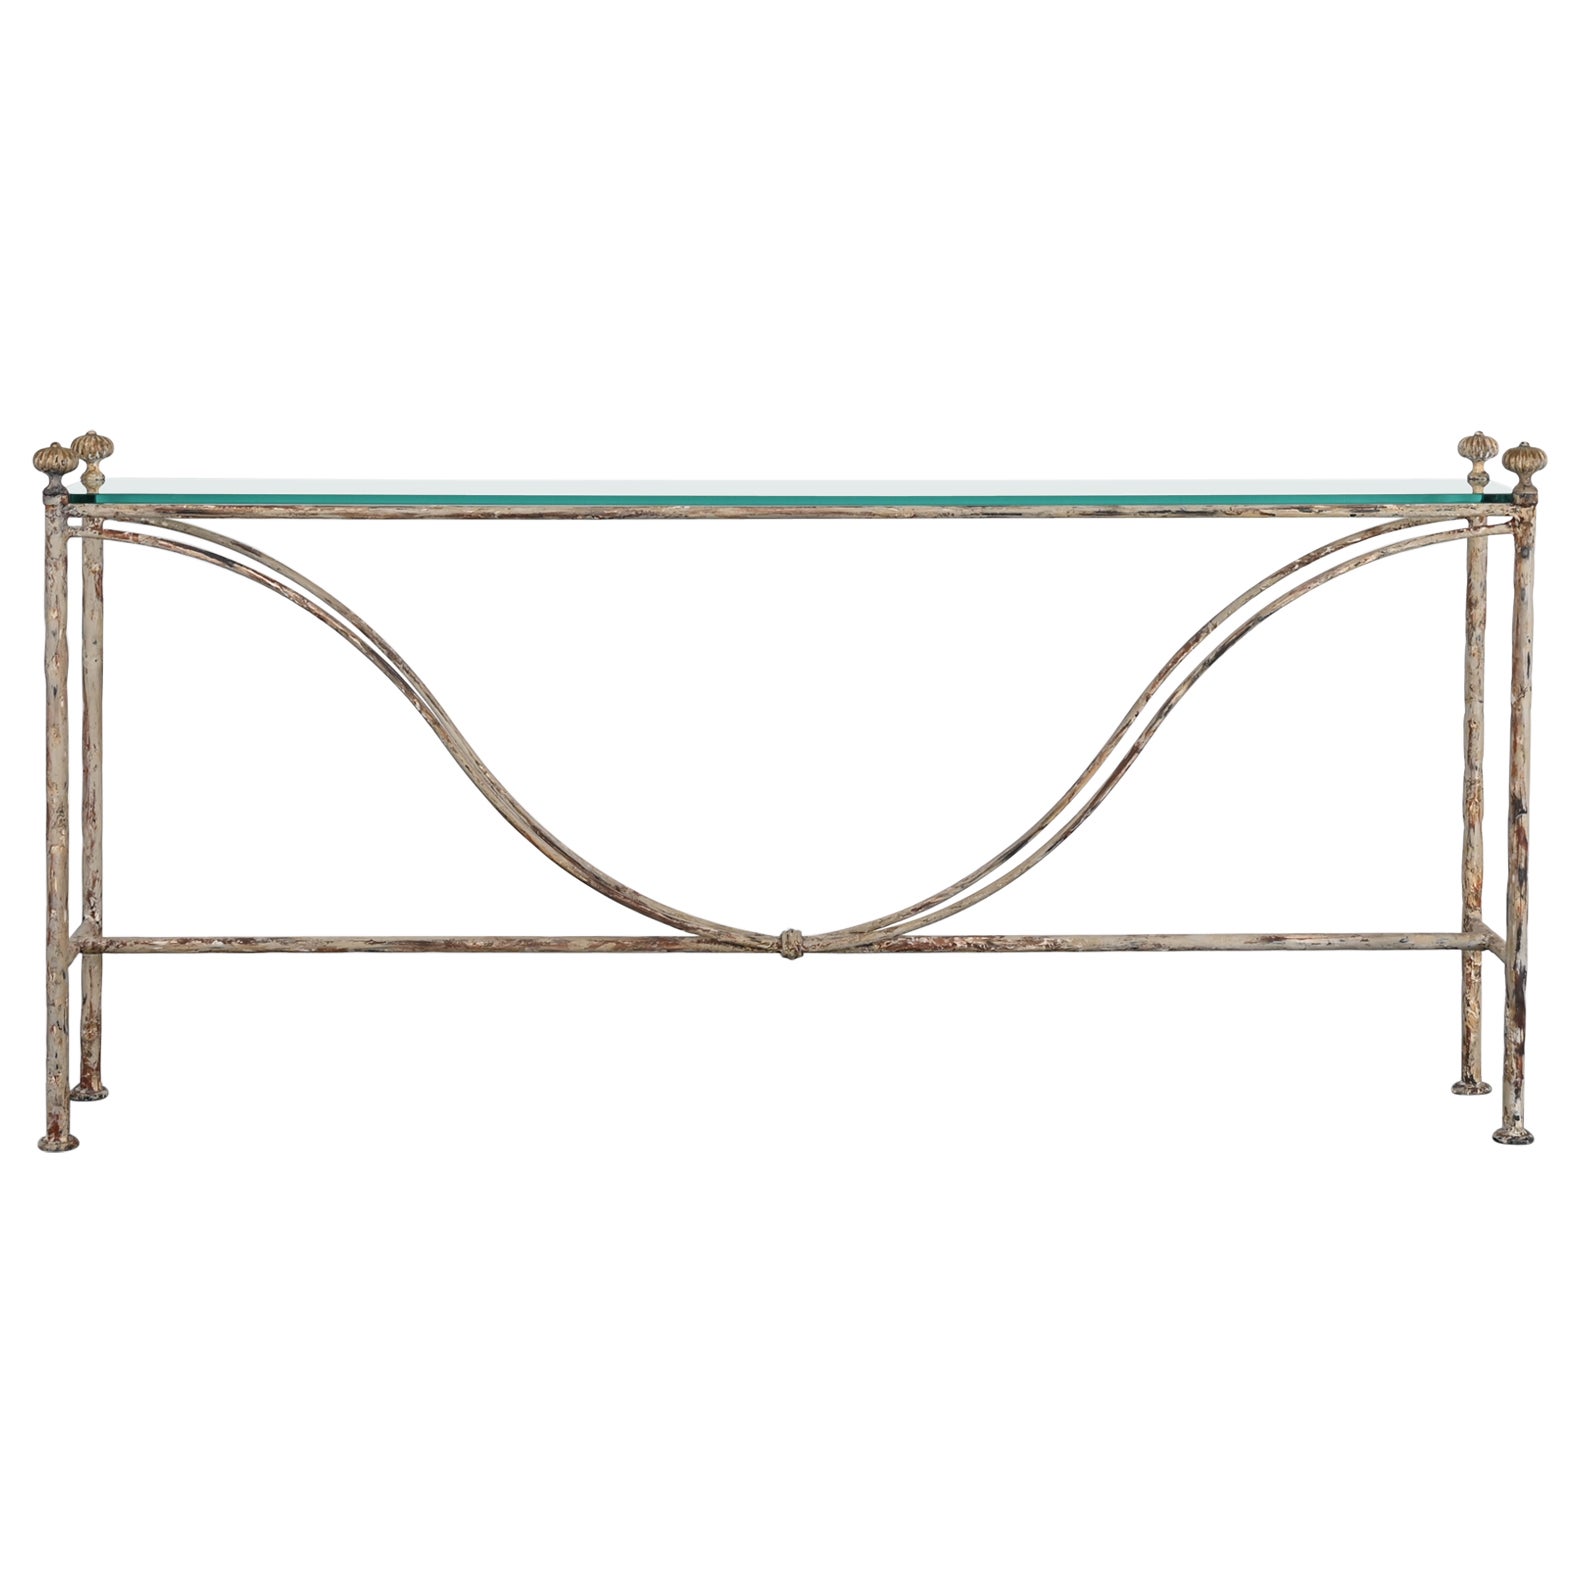 Distressed Wrought Iron Console Table by Niermann Weeks, 20th Century